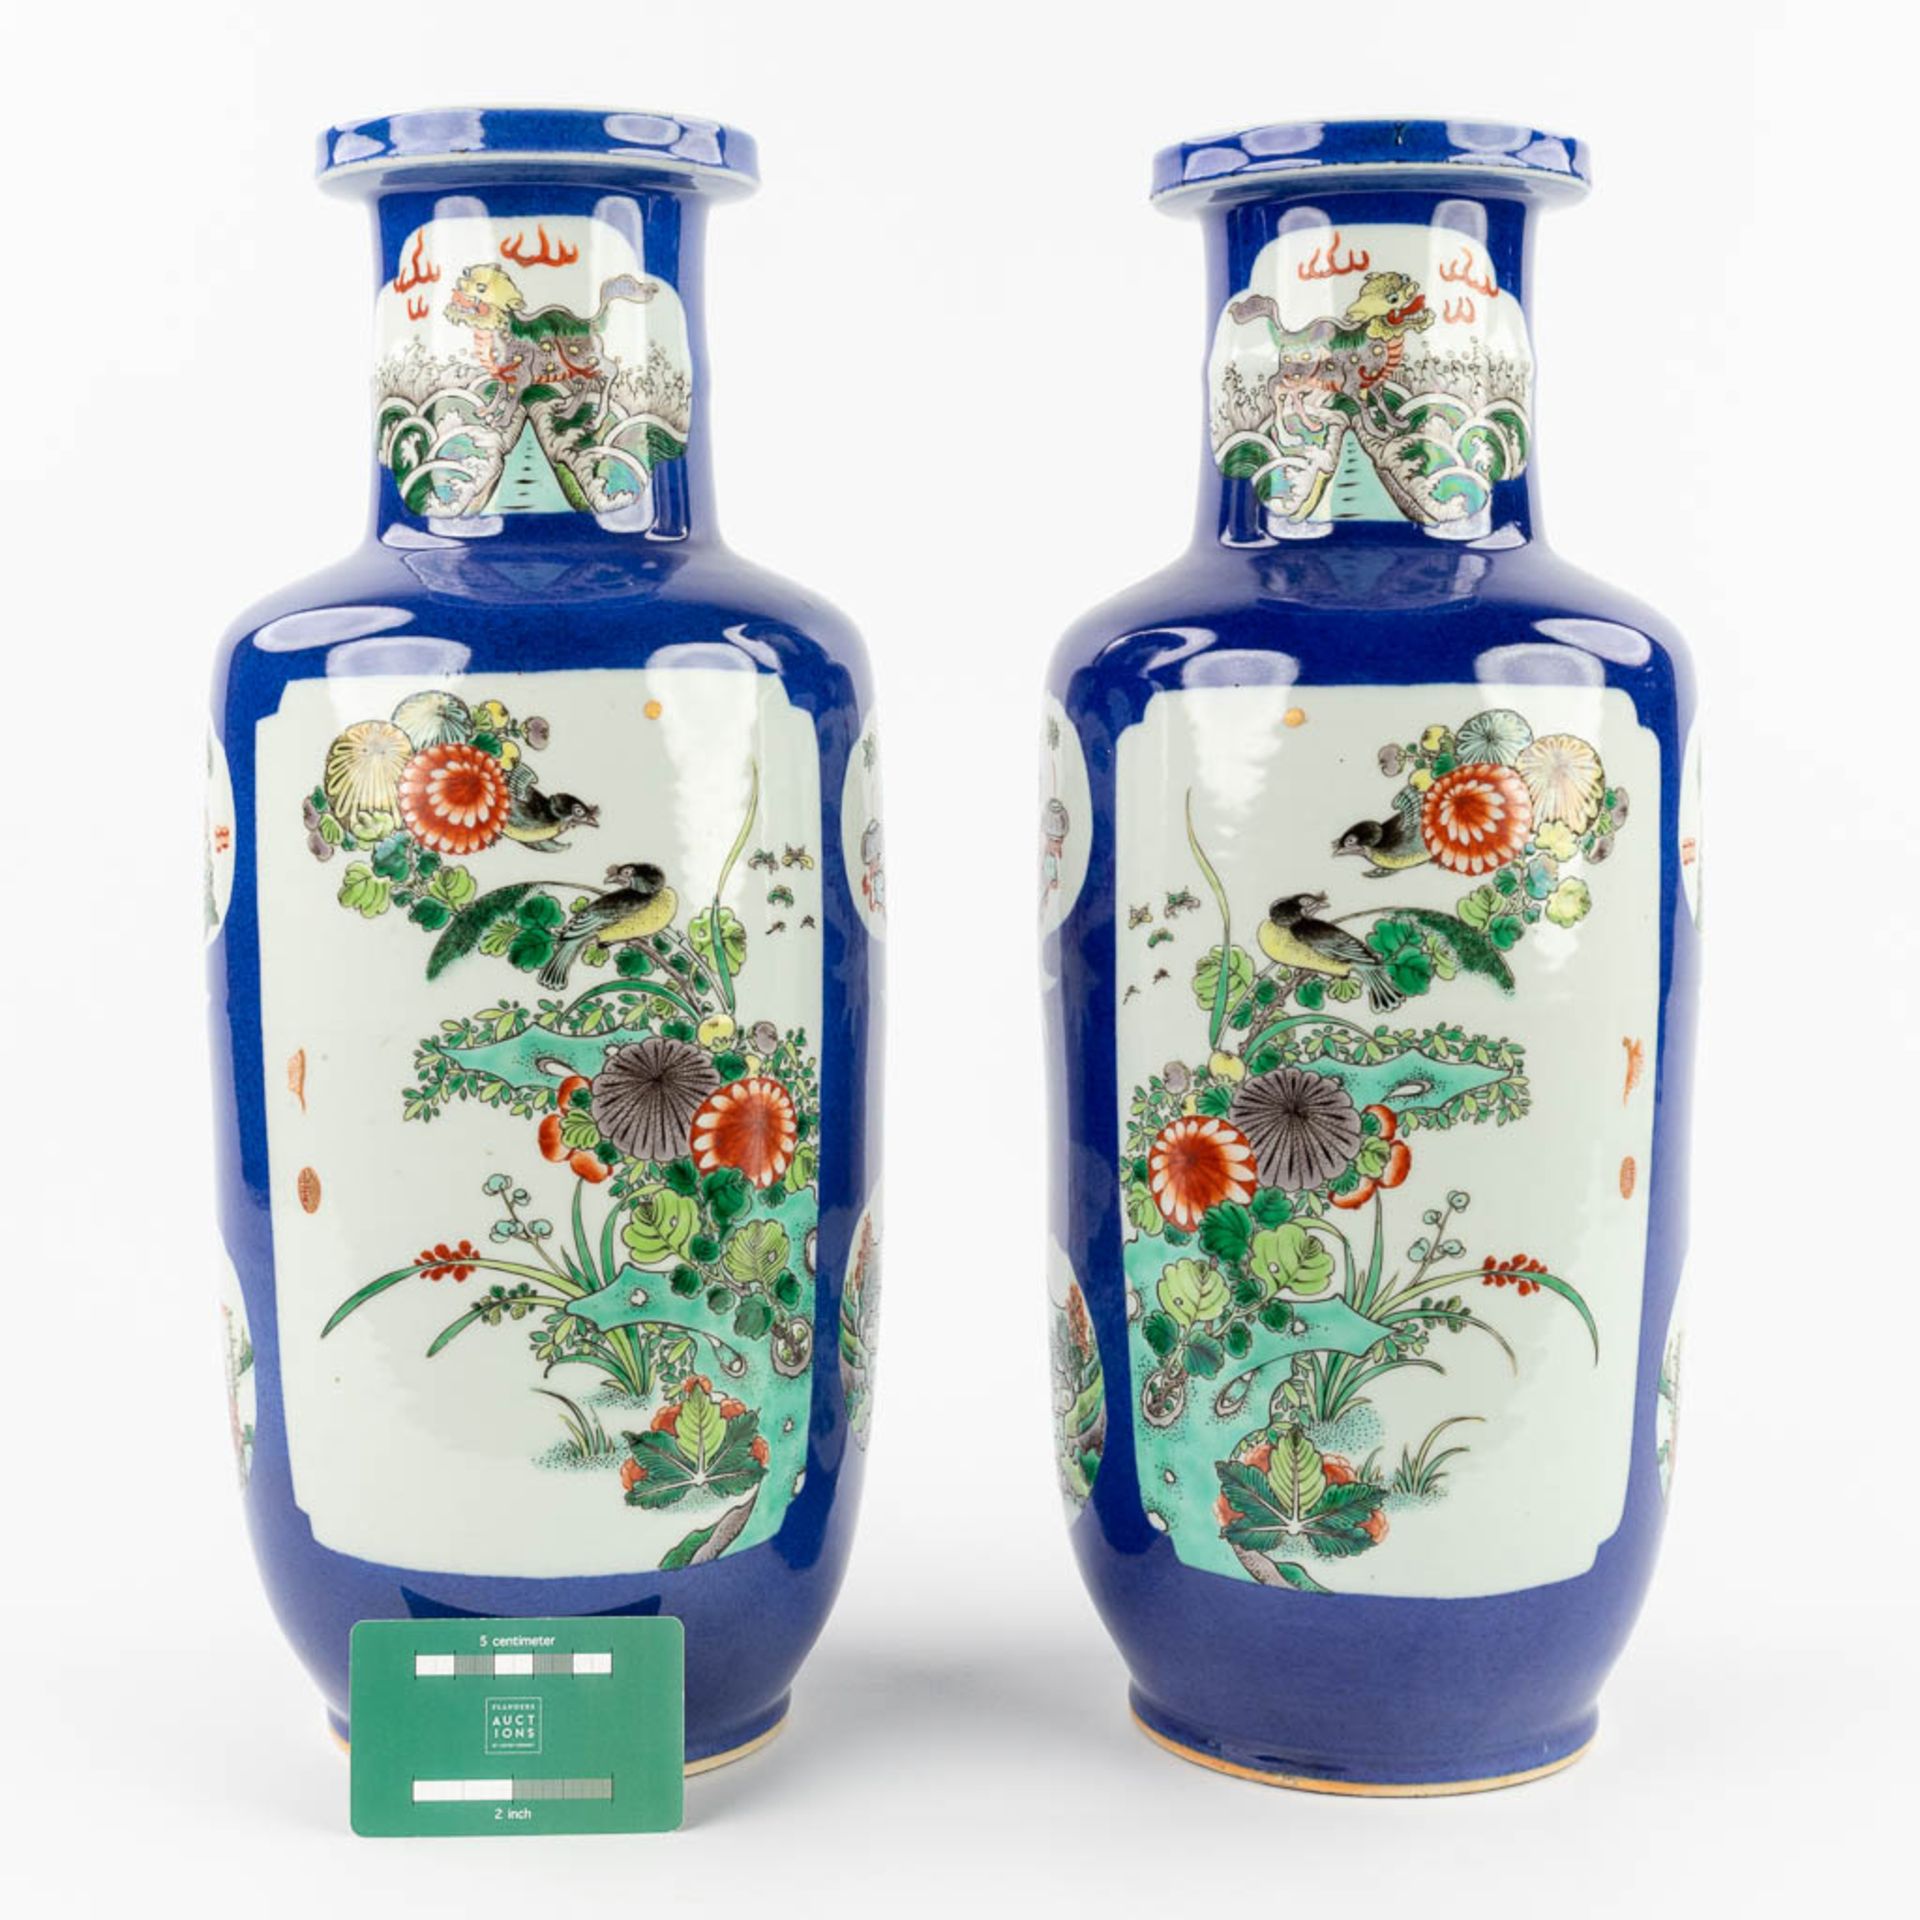 A pair of Chinese vases, decorated with fauna and flora. 20th C. (H:45 x D:18 cm) - Image 2 of 13